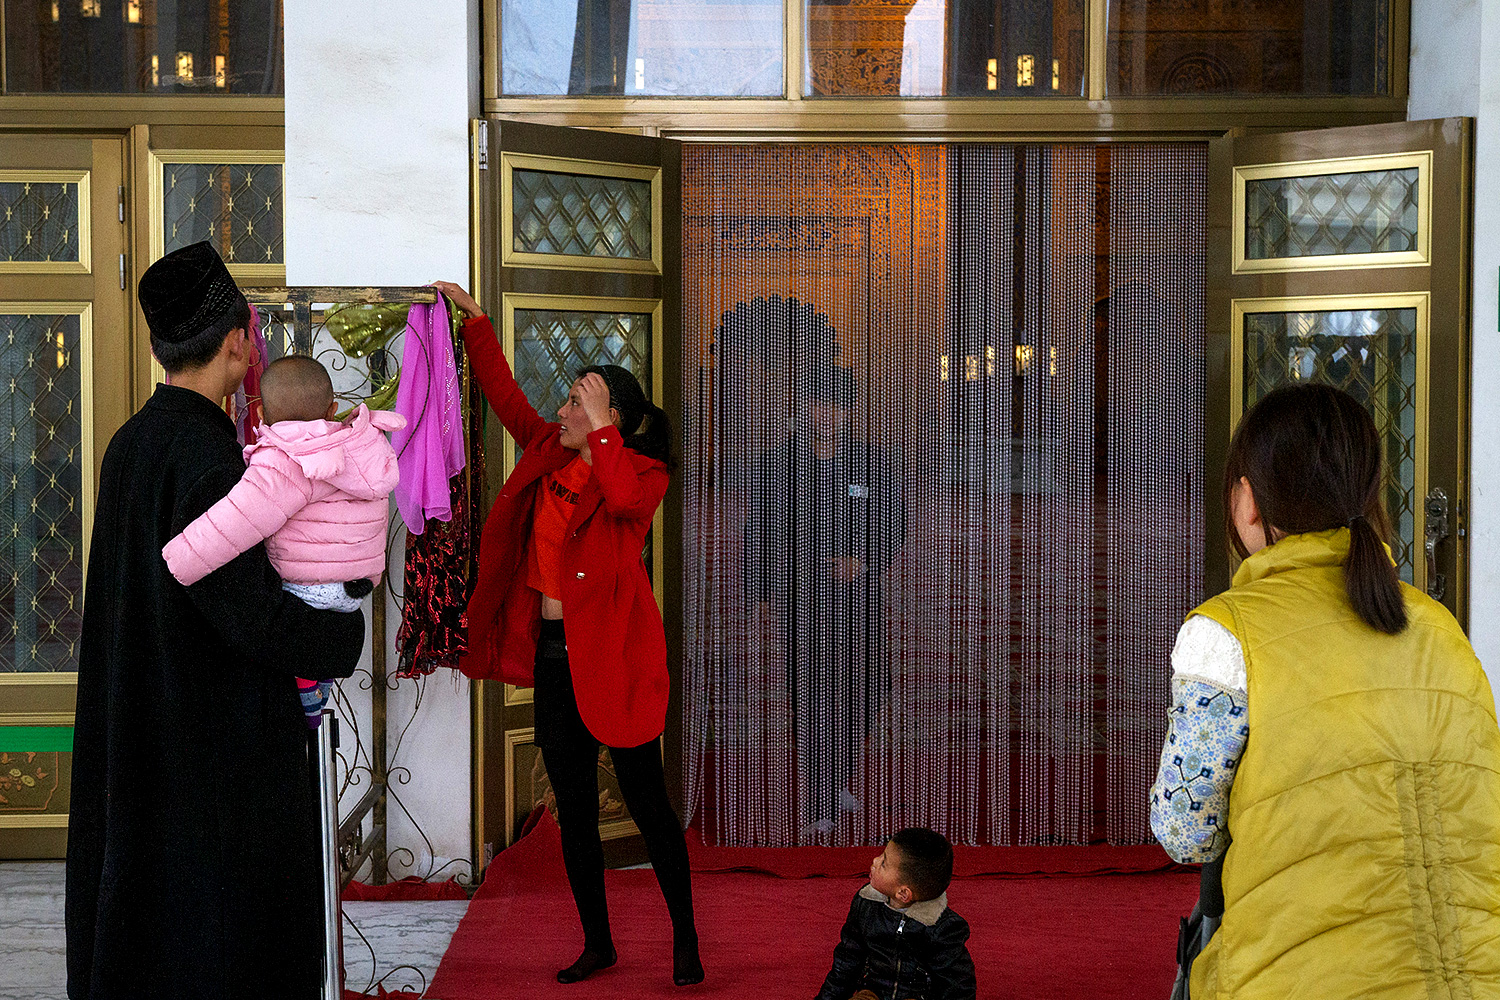 A visitor picks out a headscarf to wear before entering the Golden Palace.